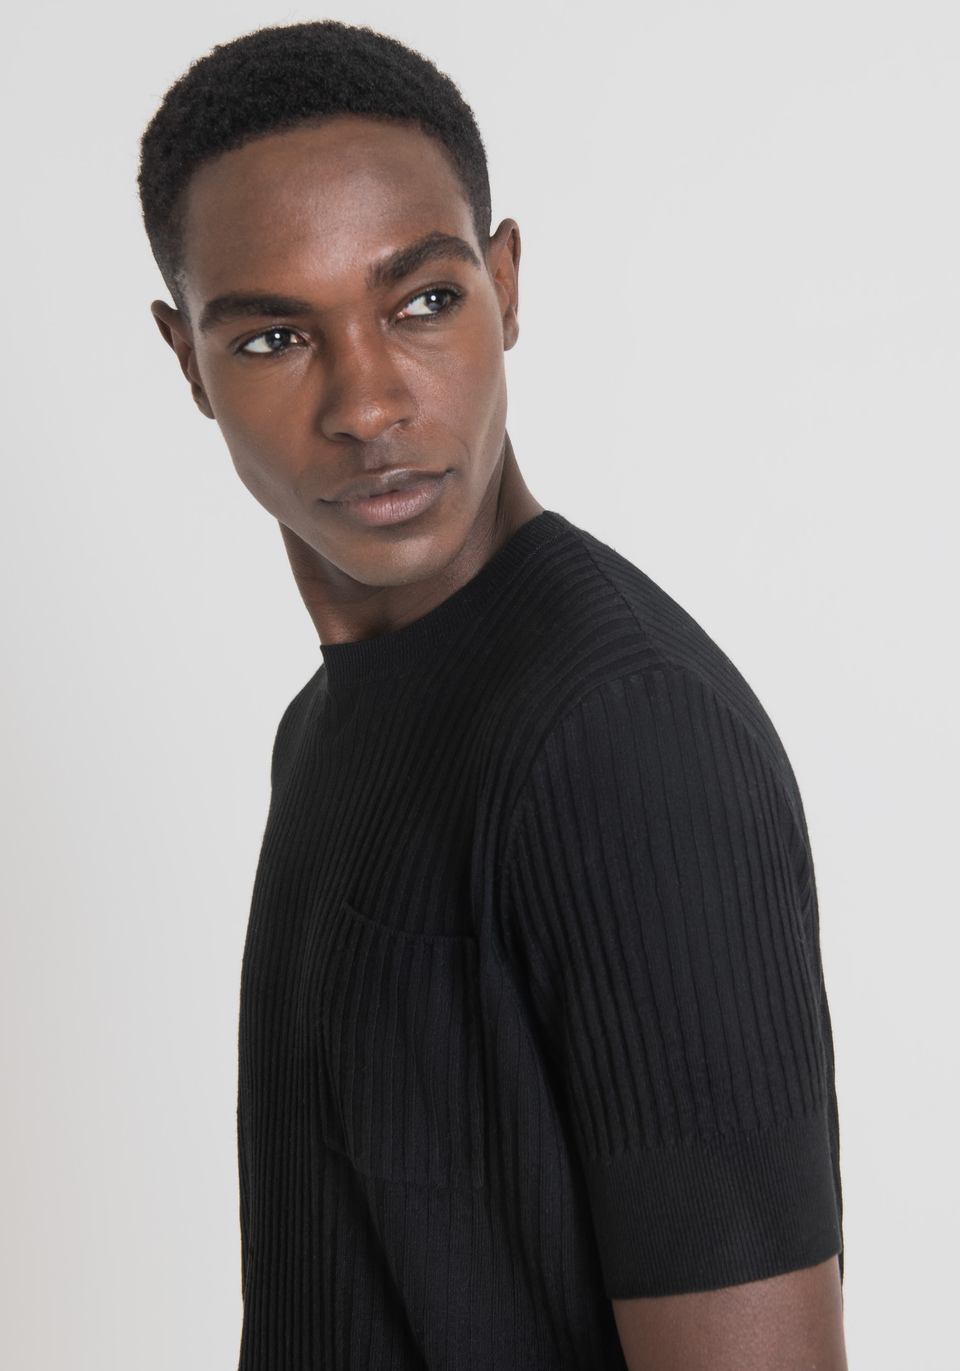 SLIM-FIT KNITTED T-SHIRT IN LINEN BLEND WITH POCKET - Antony Morato Online Shop